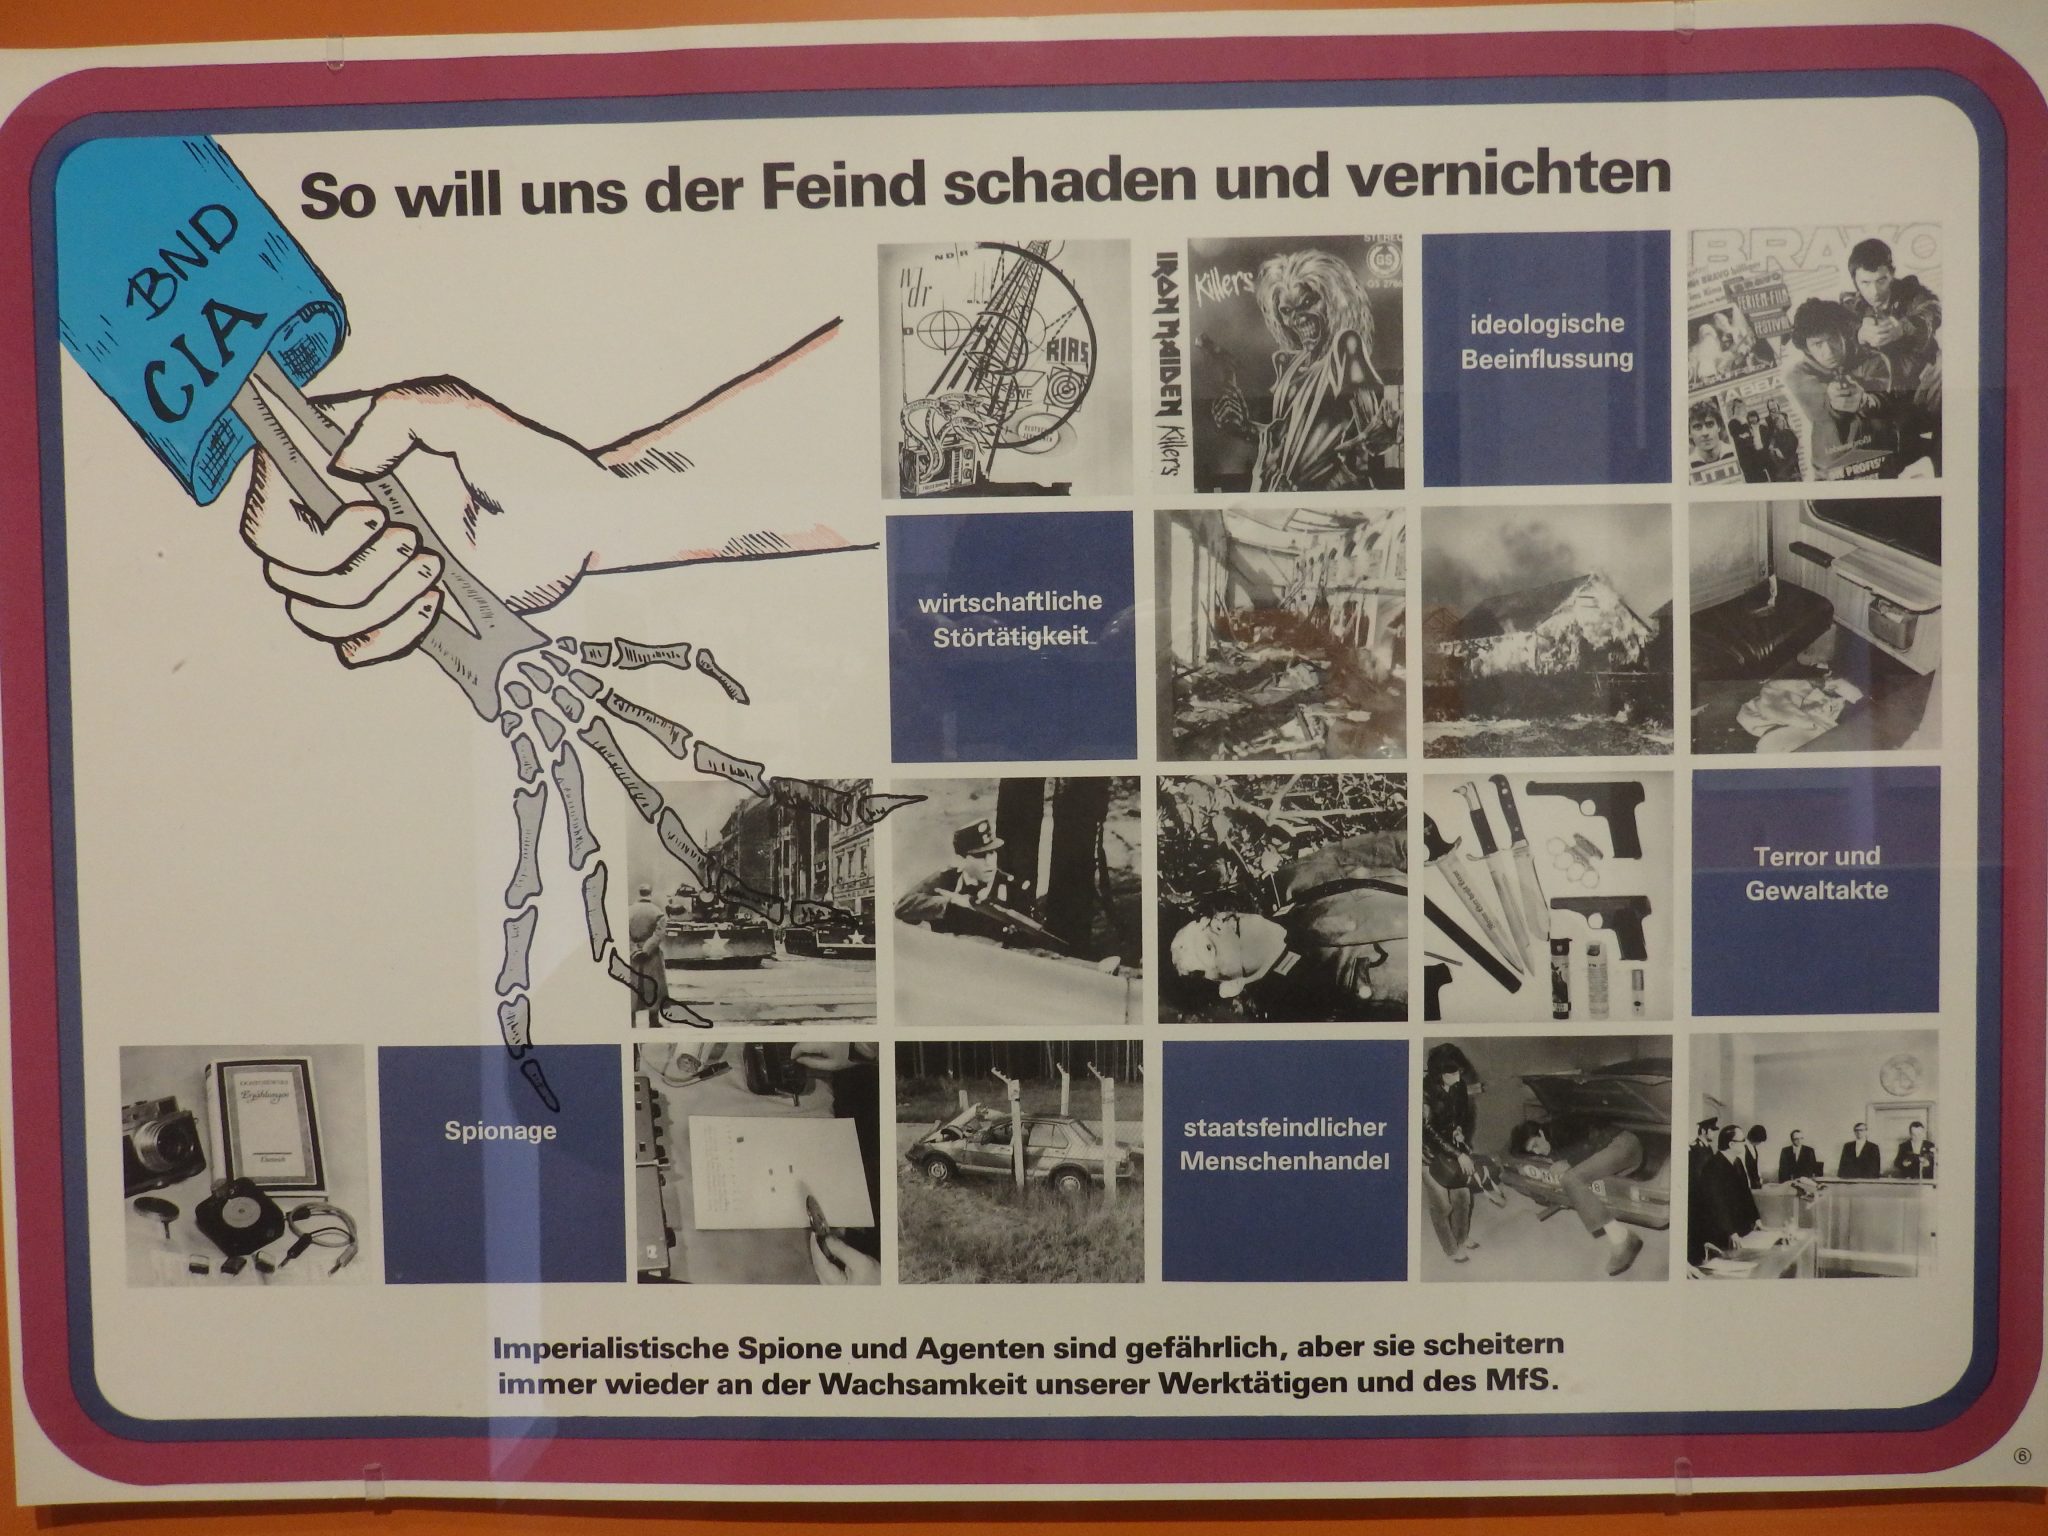 This training poster from the Stasi Museum says "This is how the enemy wants to harm and destroy us."